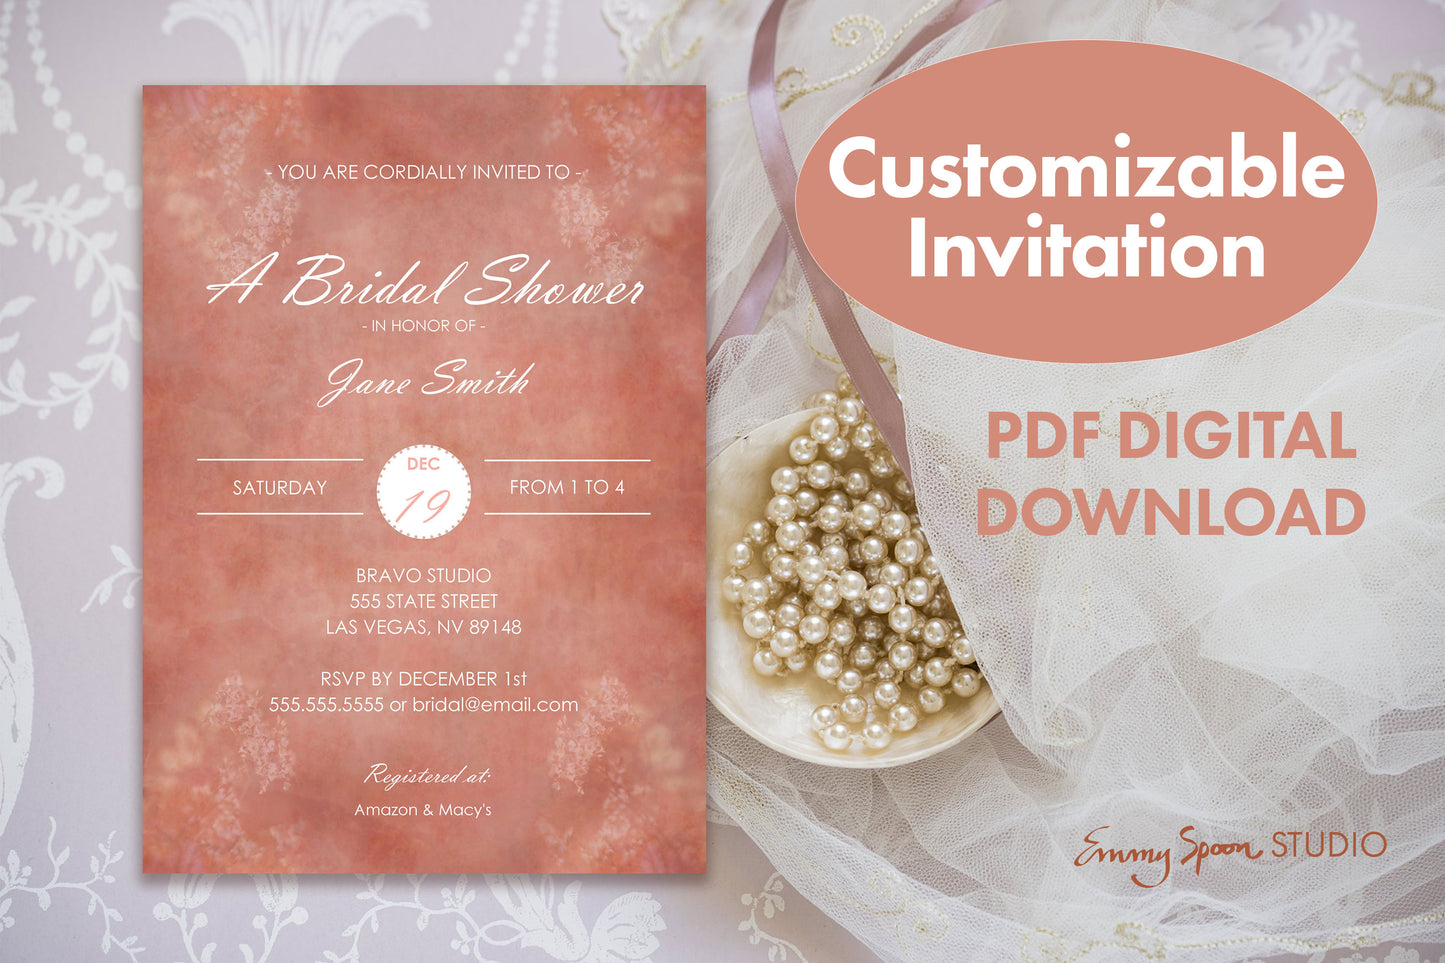 Customizable Invitation shows bridal shower example. PDF Digital Download by Emmy Spoon Studio